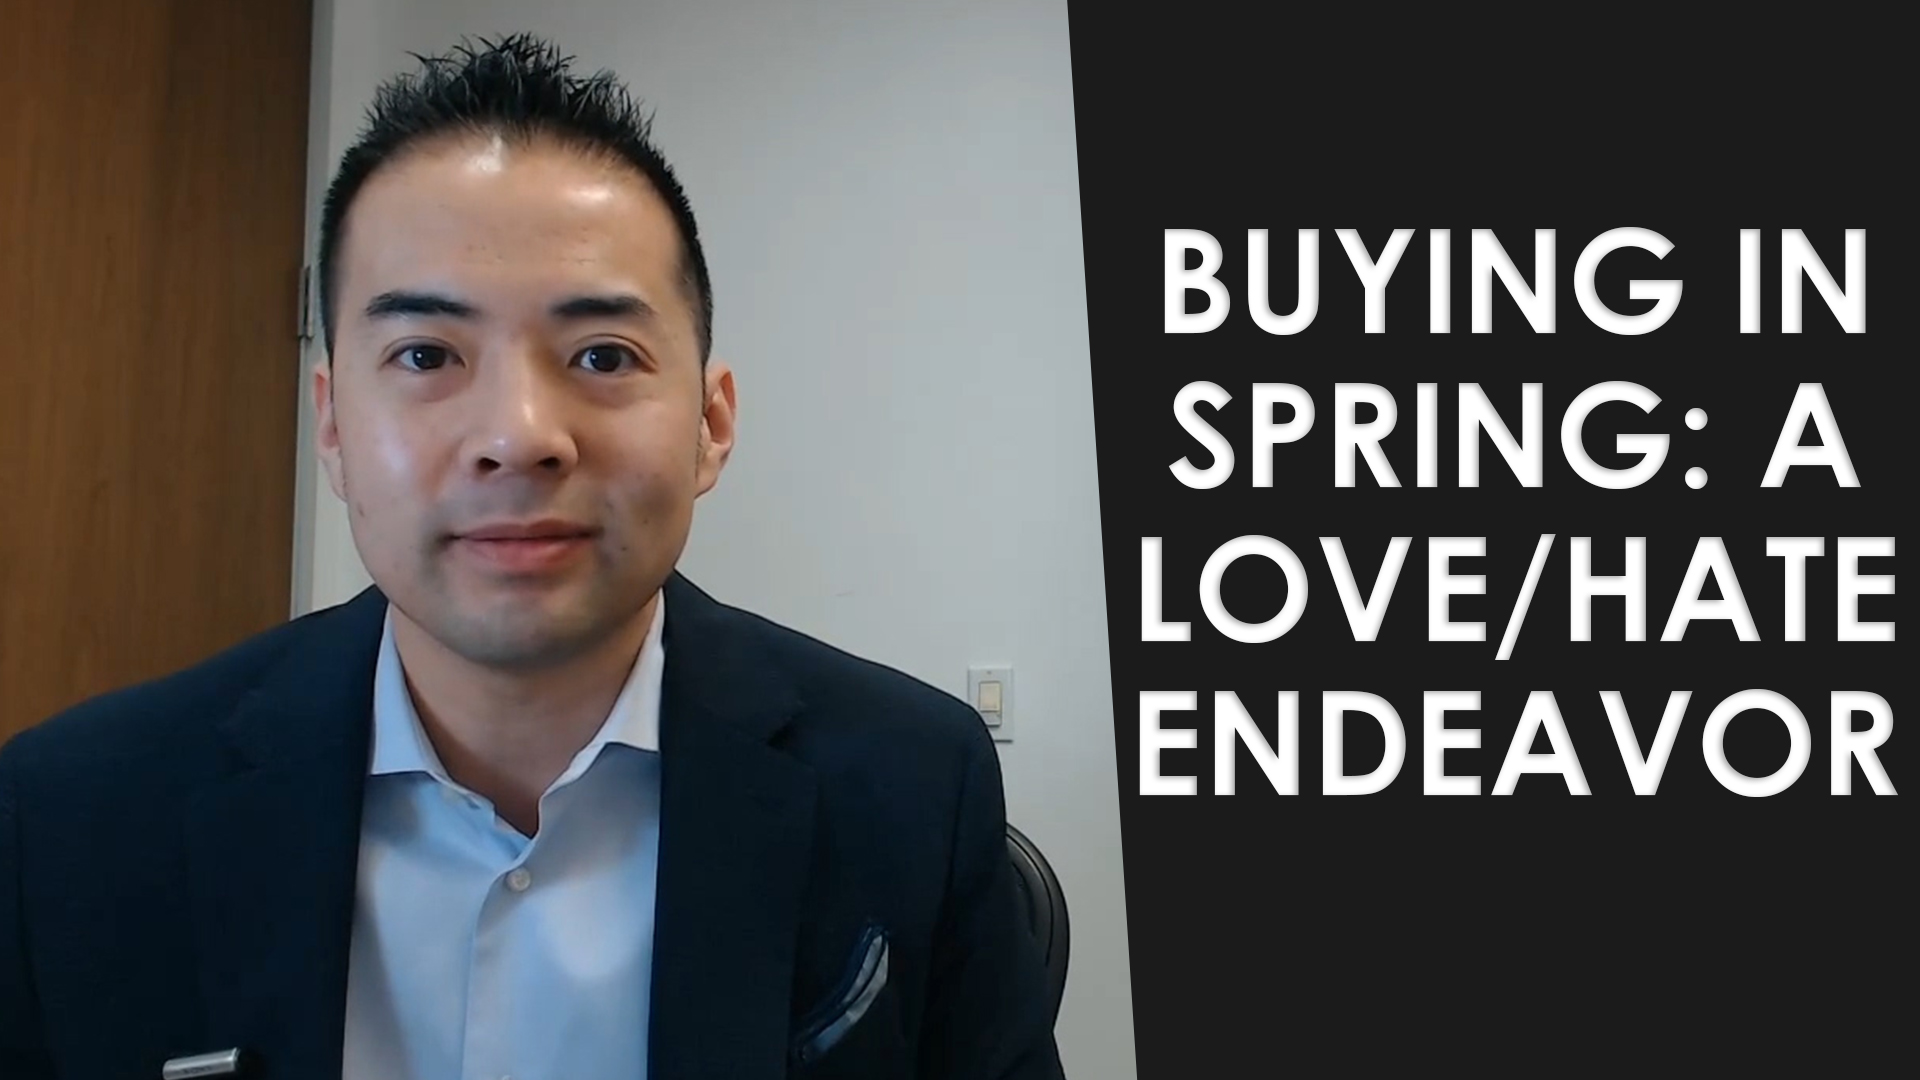 What’s There to Love (and Hate) About Buying in Spring?